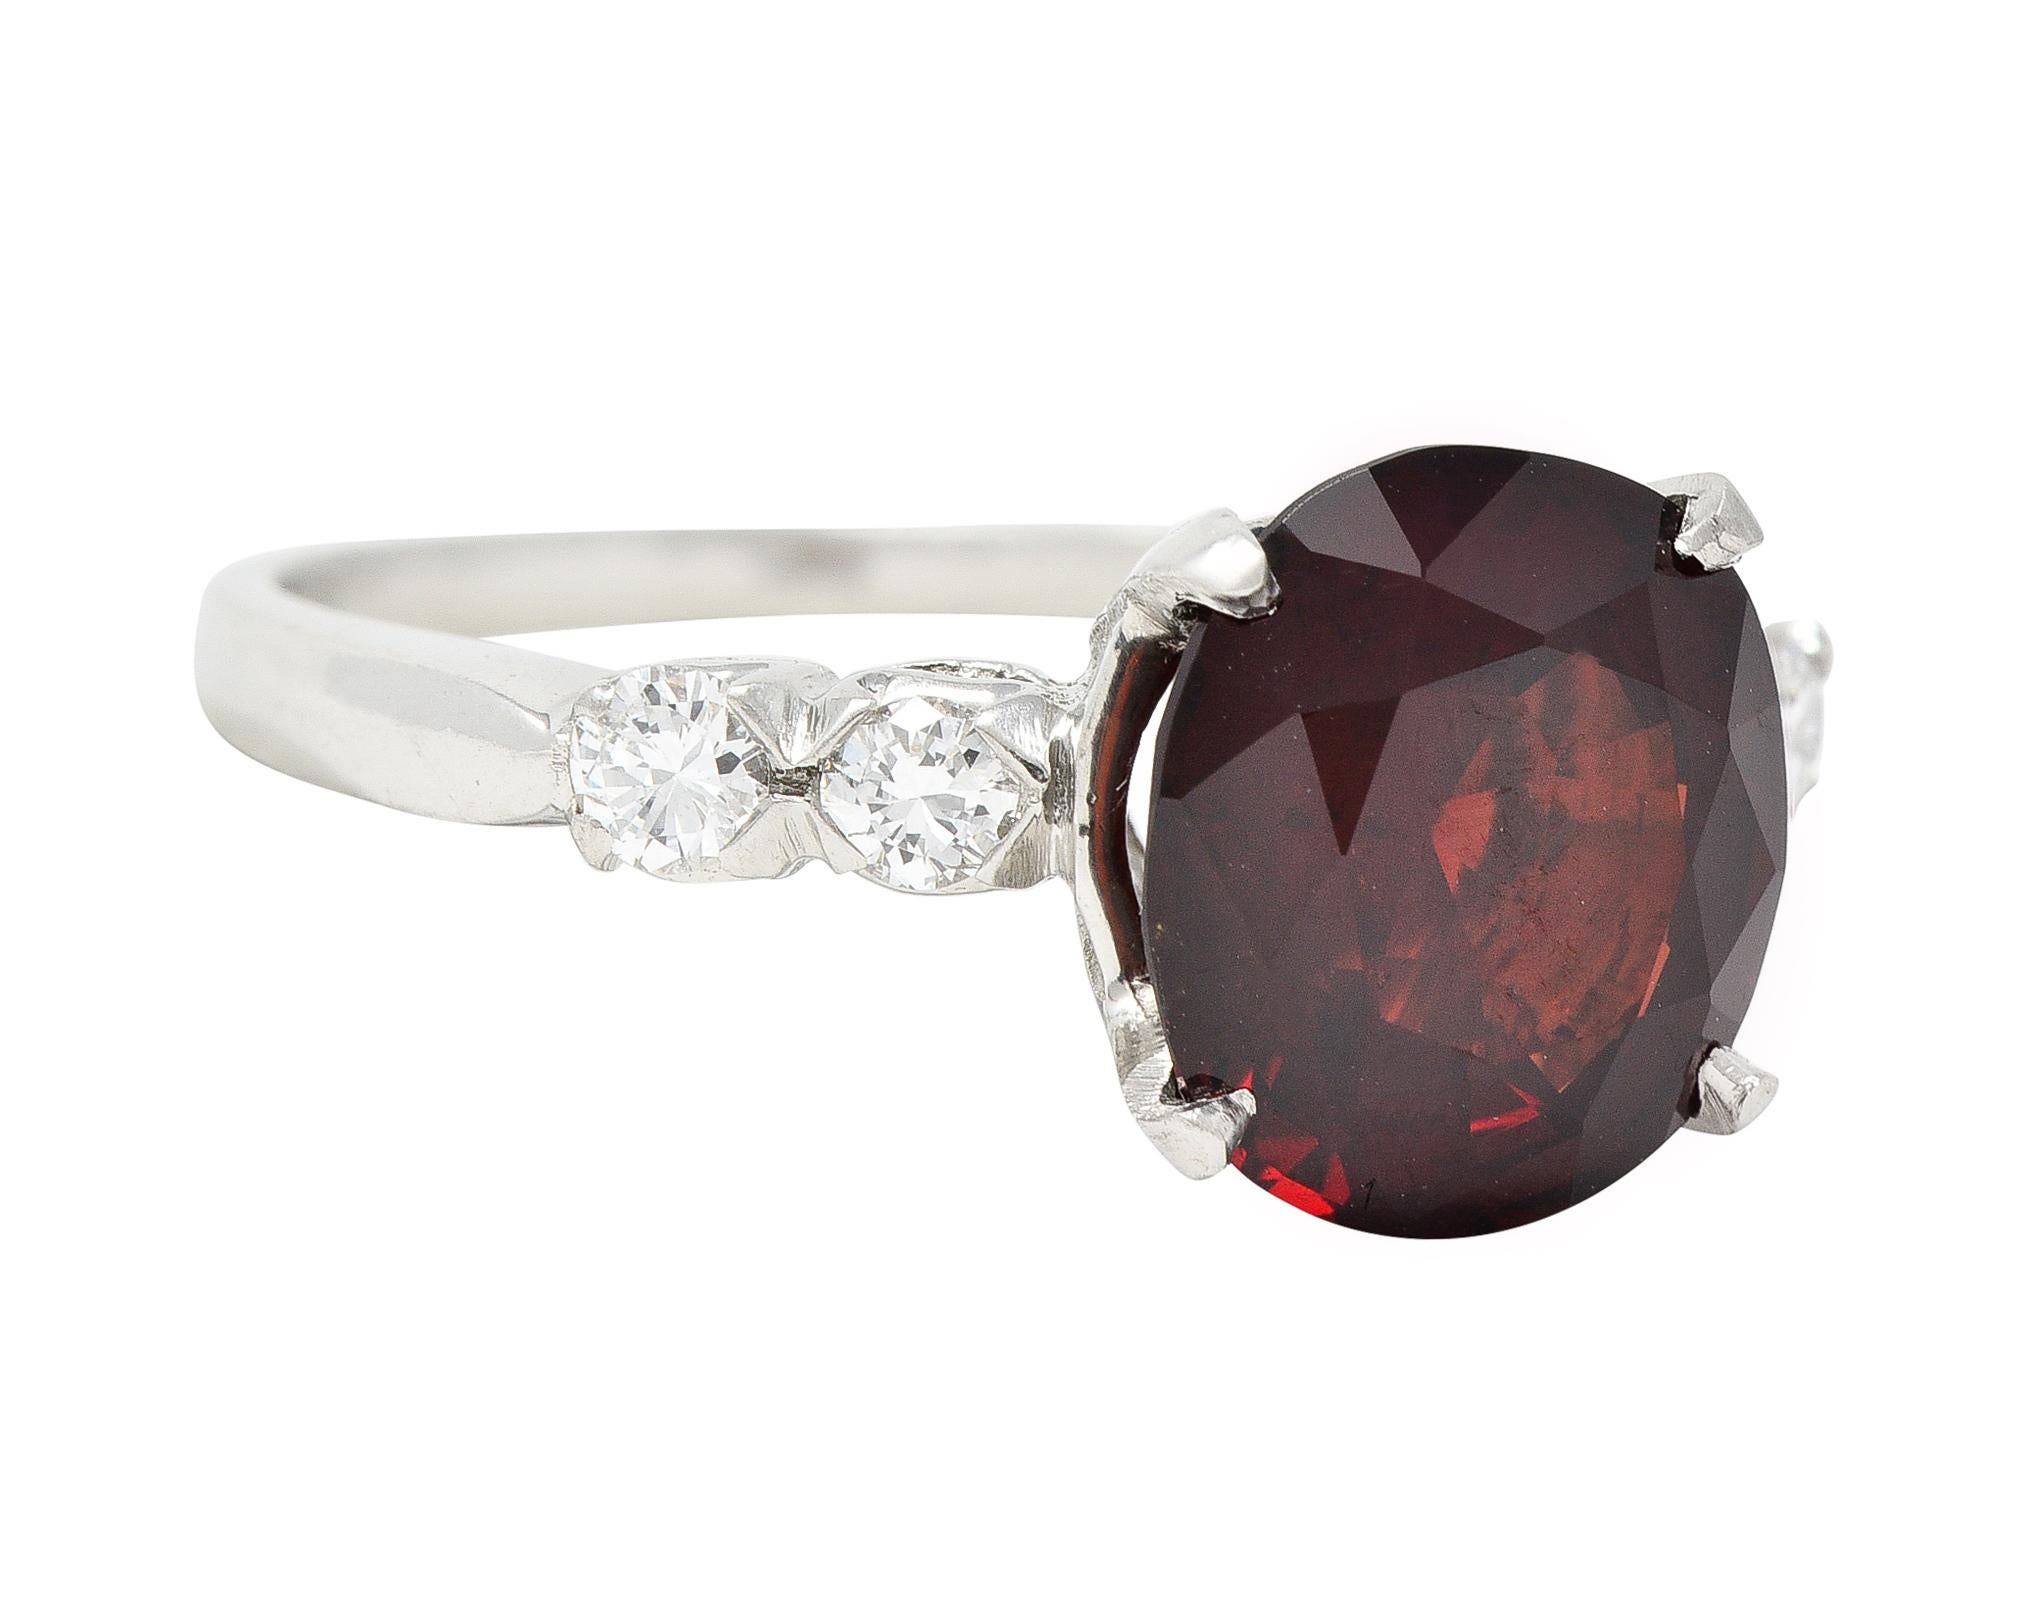 Centering a cushion cut spinel weighing approximately 3.62 carats - transparent dark red in color 
Prong set in basket and flanked by prong set round brilliant cut diamonds
Weighing approximately 0.20 carats total - eye clean and bright
Completed by